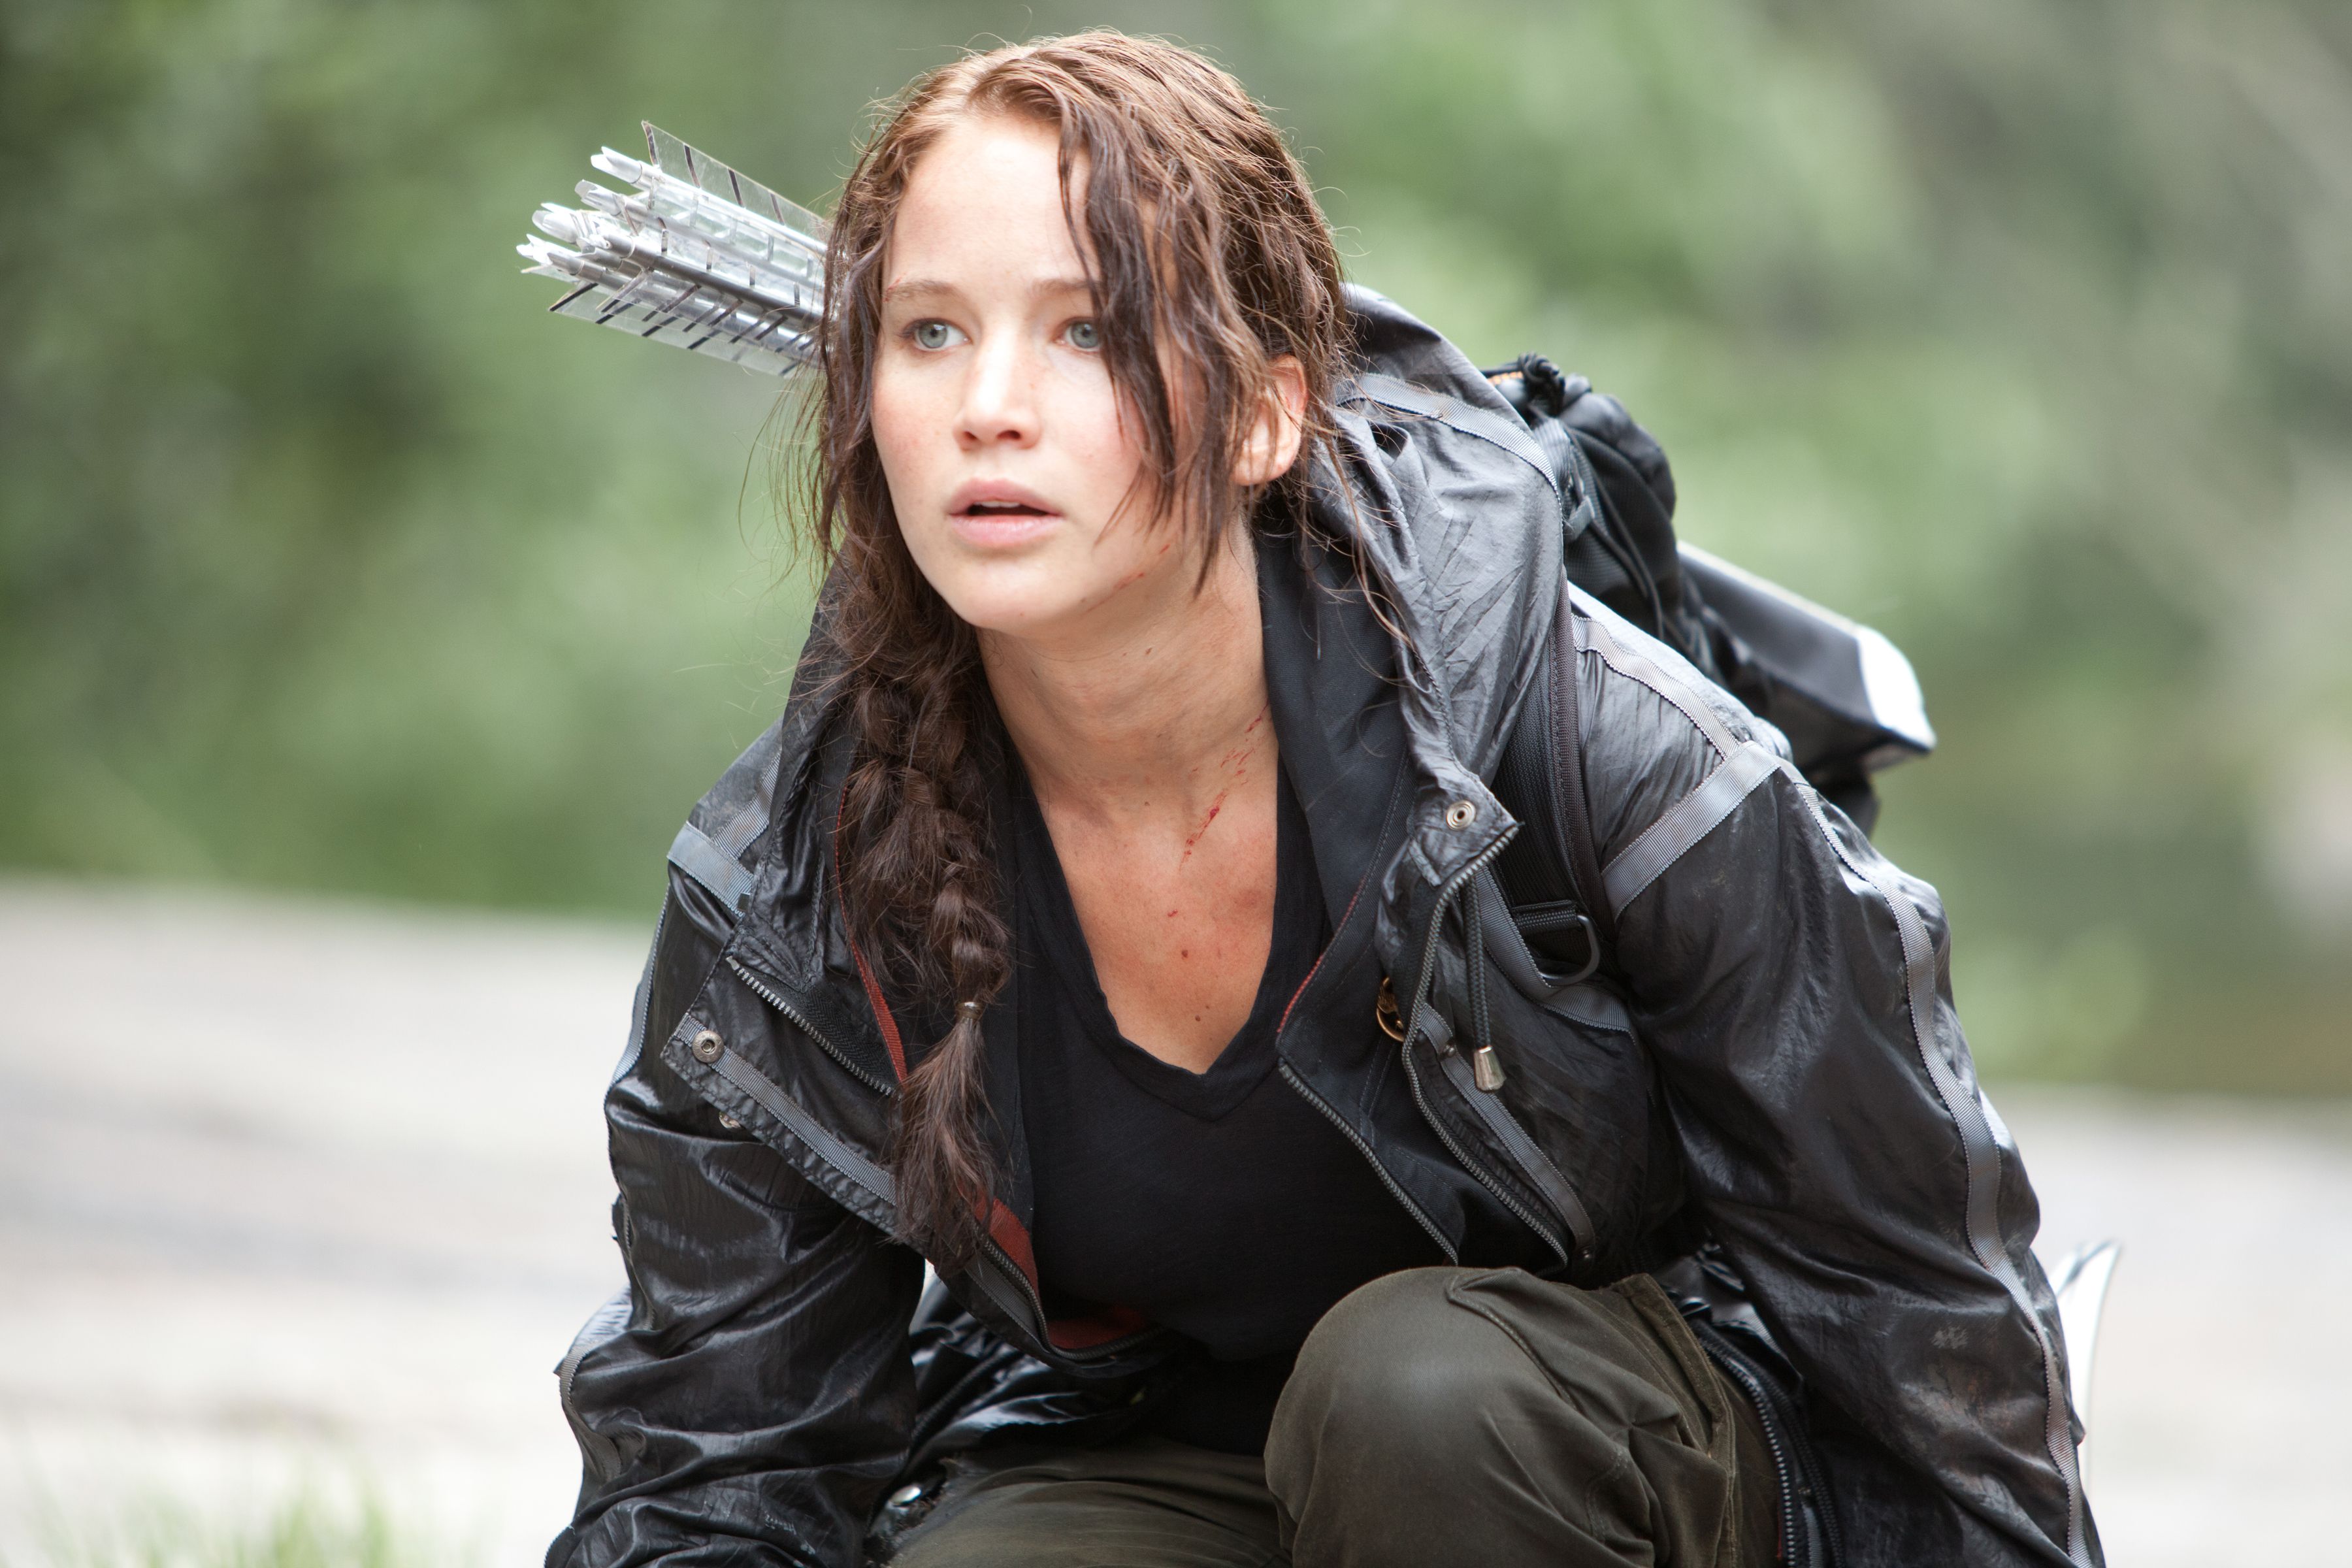 The Hunger Games' Everdeen, you are Teflon. The Original Feed